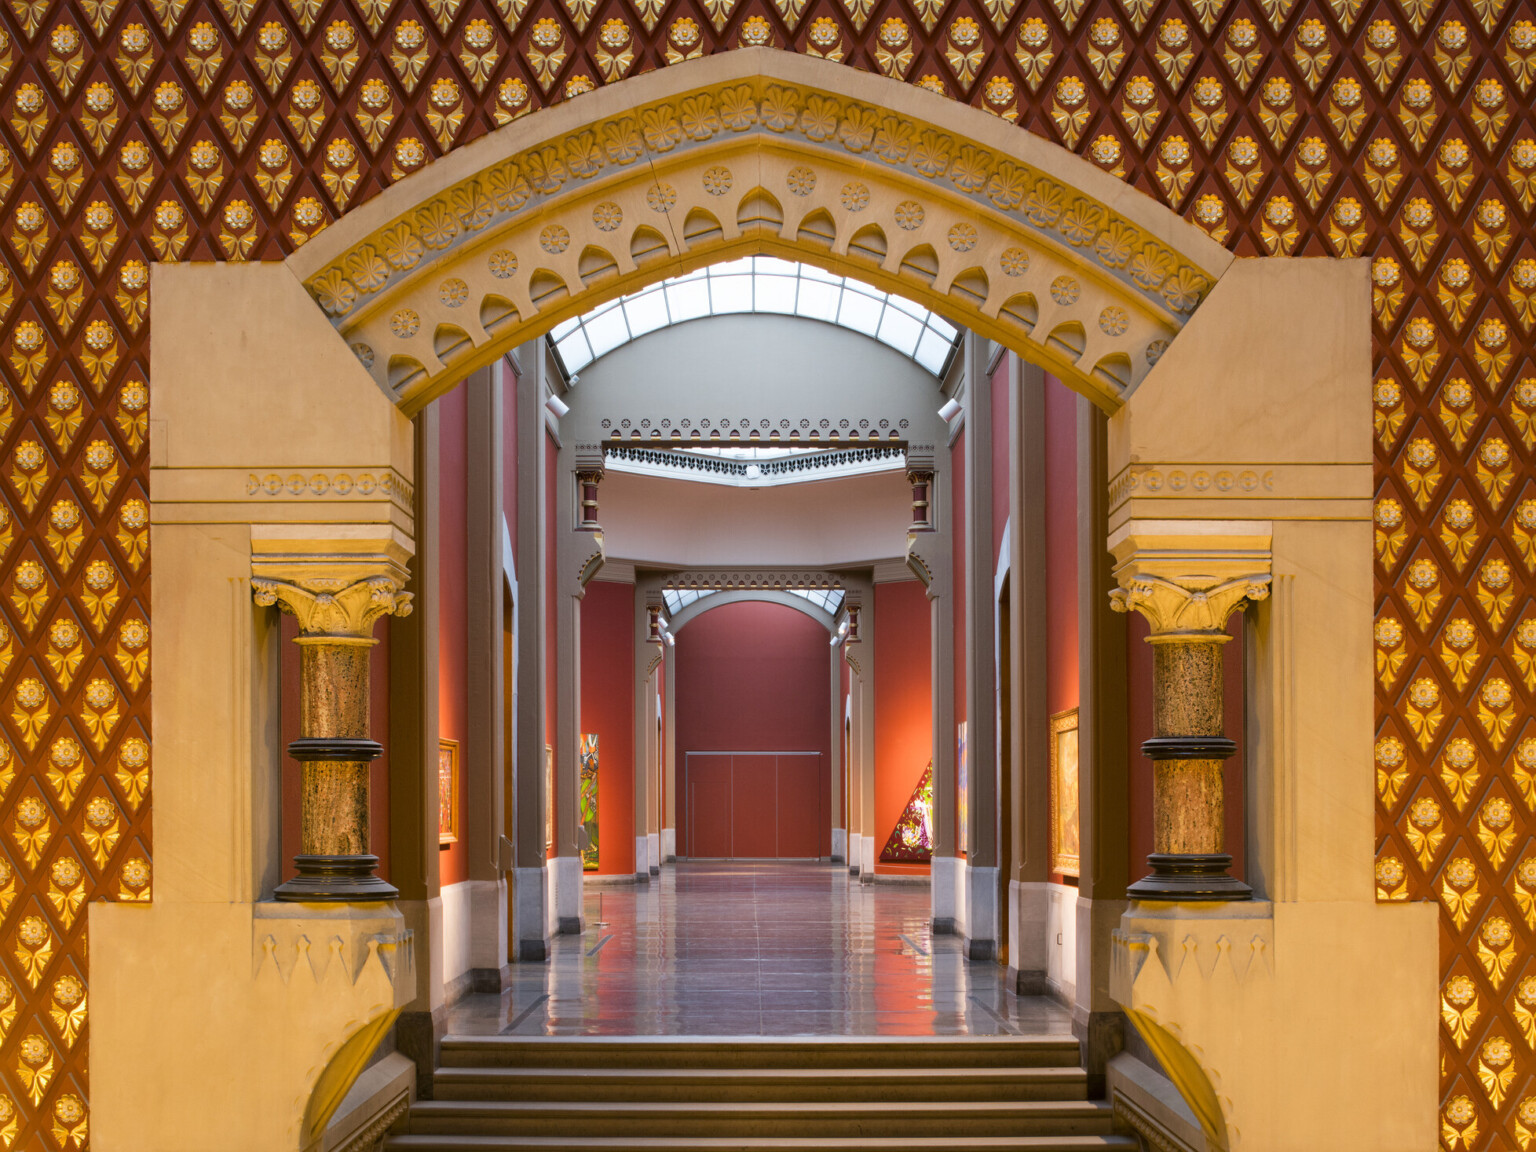 Corridor entry with sculpted stone archway with banded Corinthian columns, the hall is painted red with skylights above